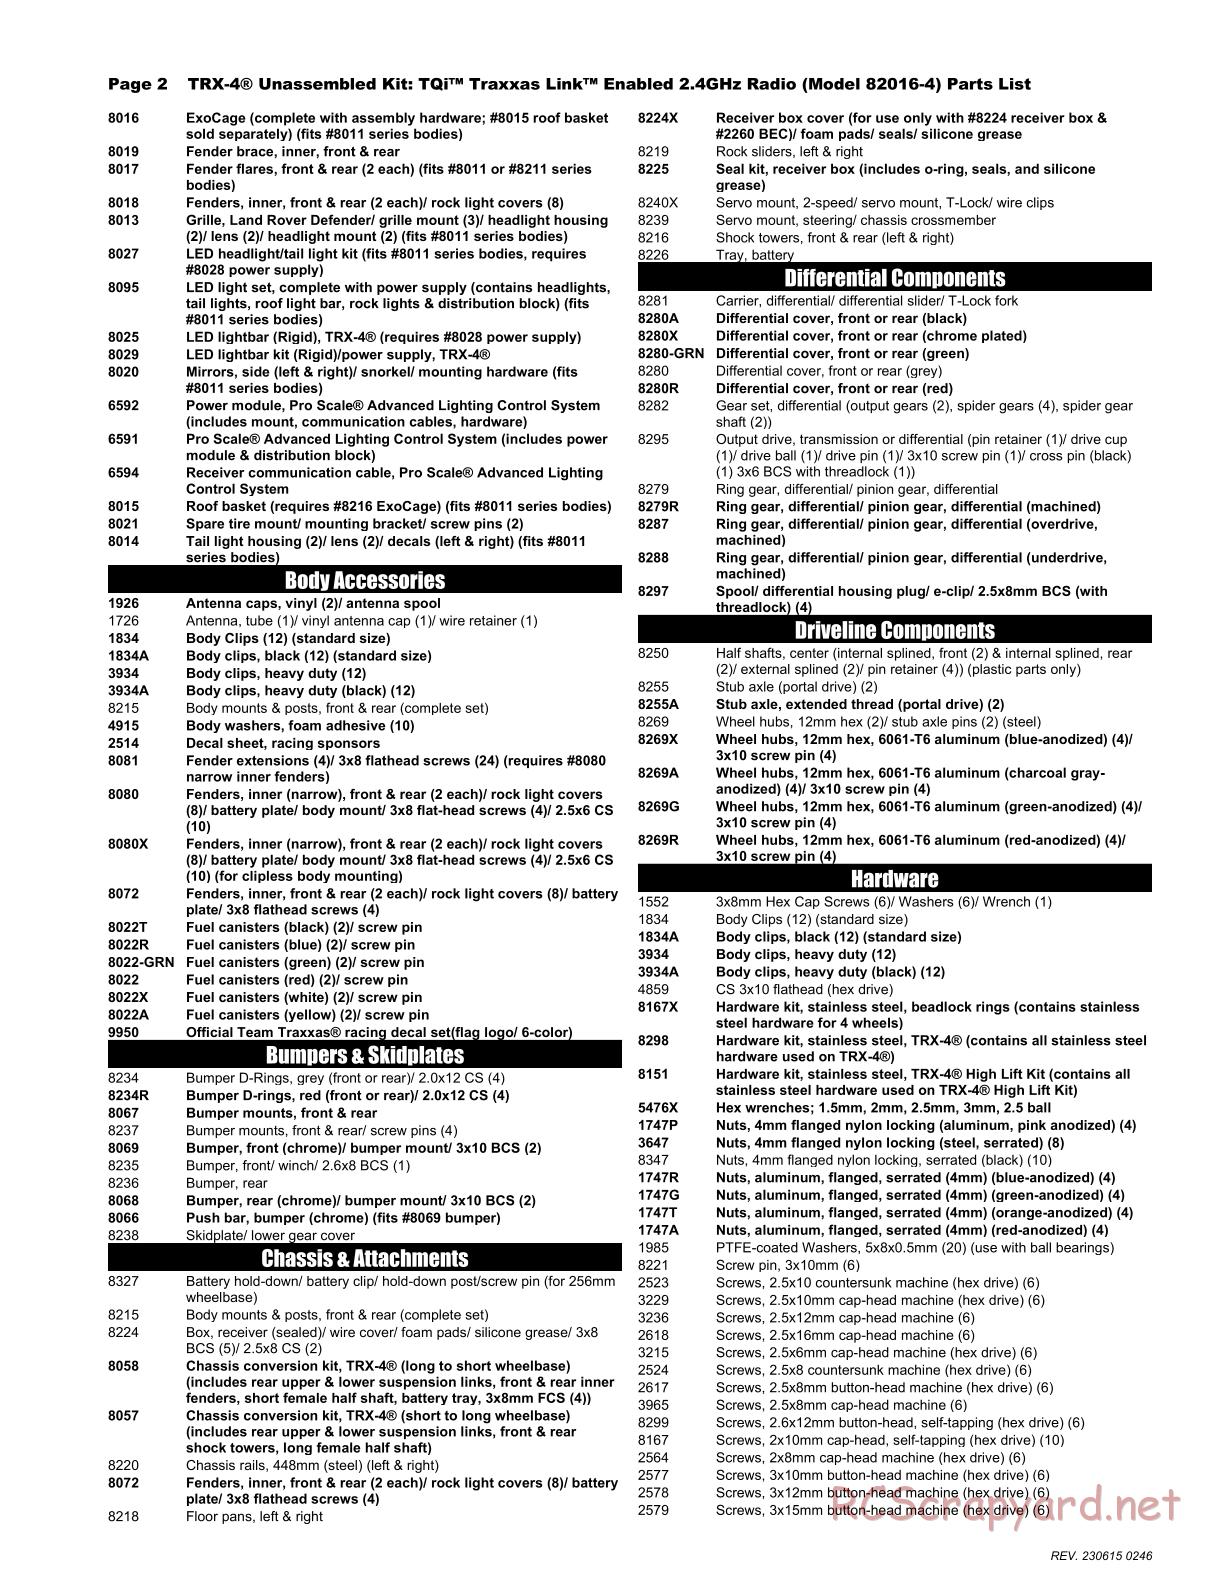 Traxxas - TRX-4 Chassis (2018) - Parts List - Page 2